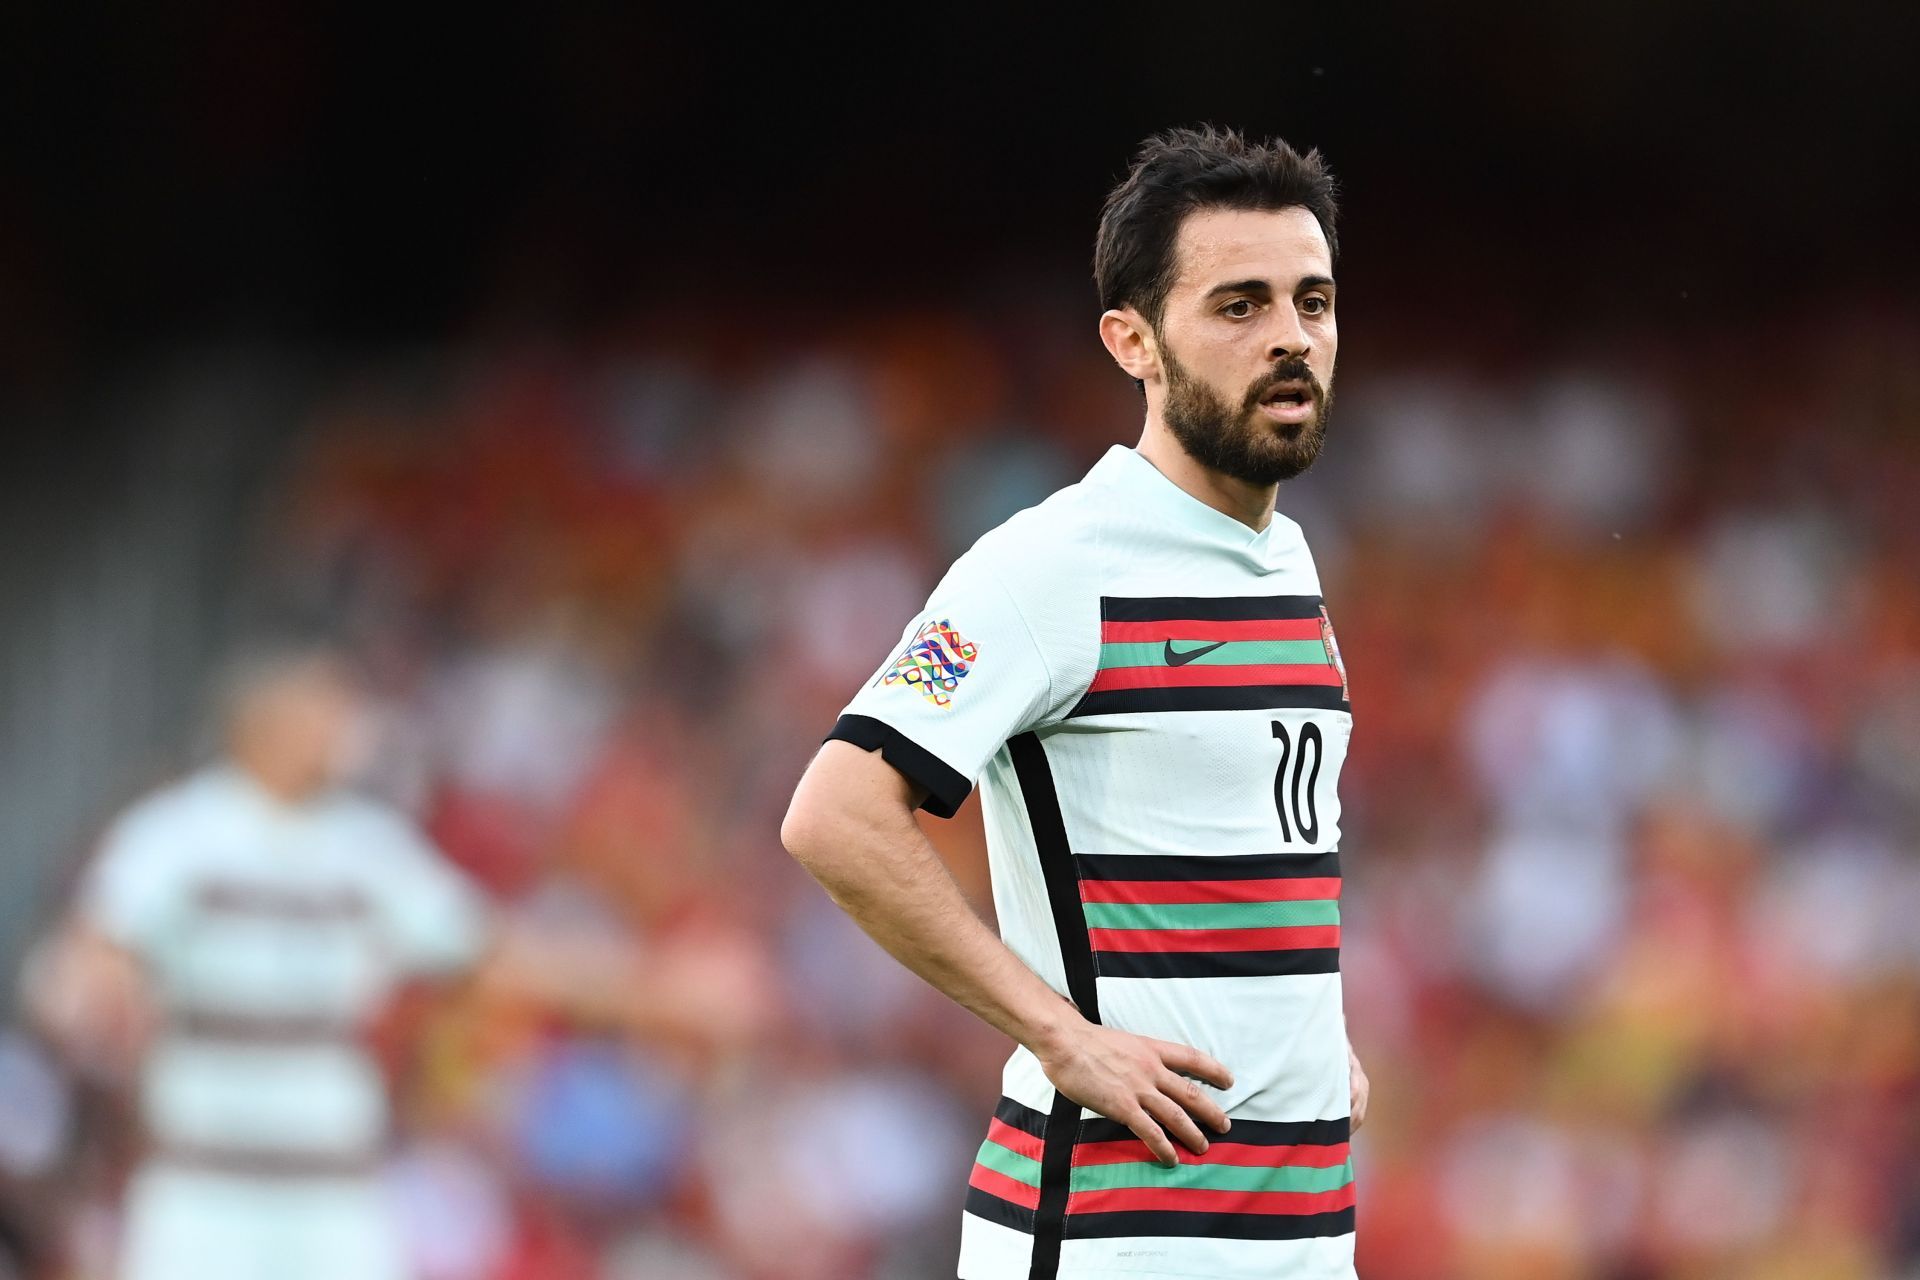 Bernardo Silva has been linked with a move away from the Emirates this summer.